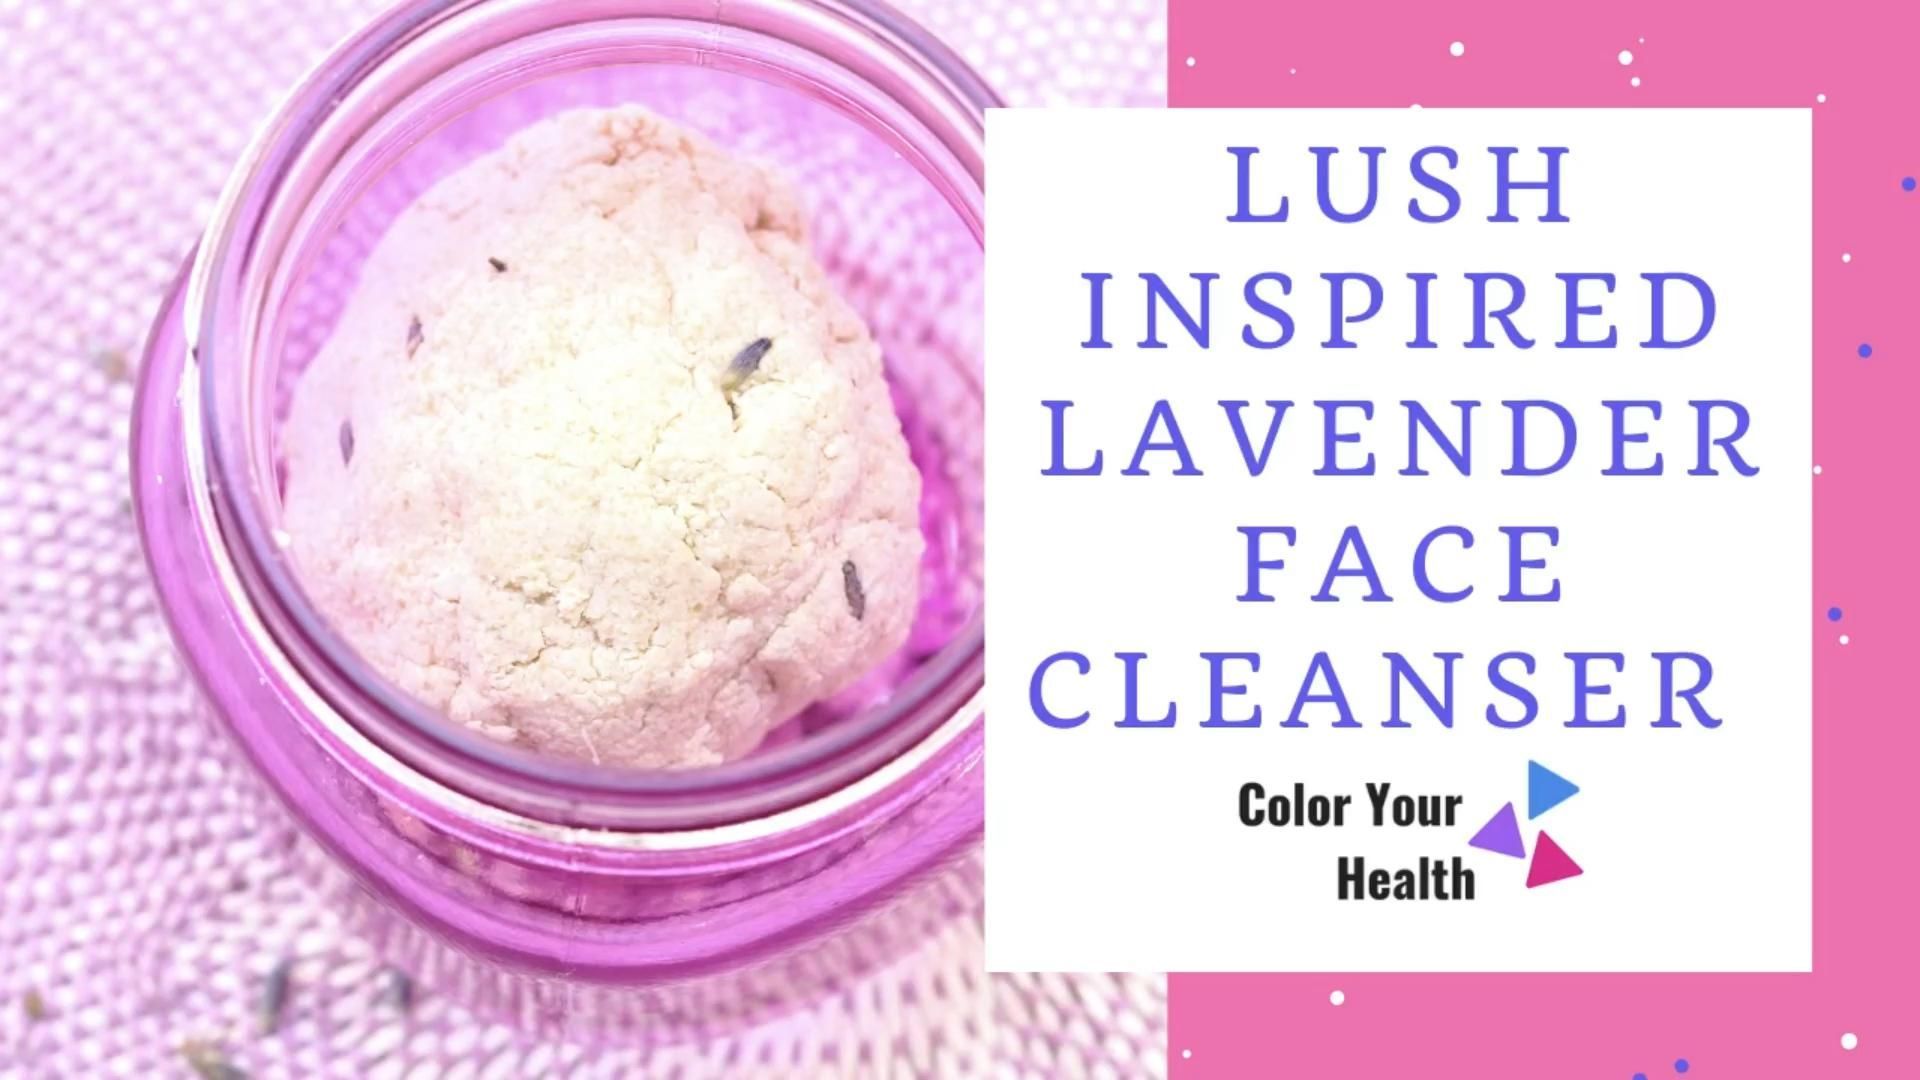 Gentle Face Cleanser Inspired By Lush -   diy Beauty lush